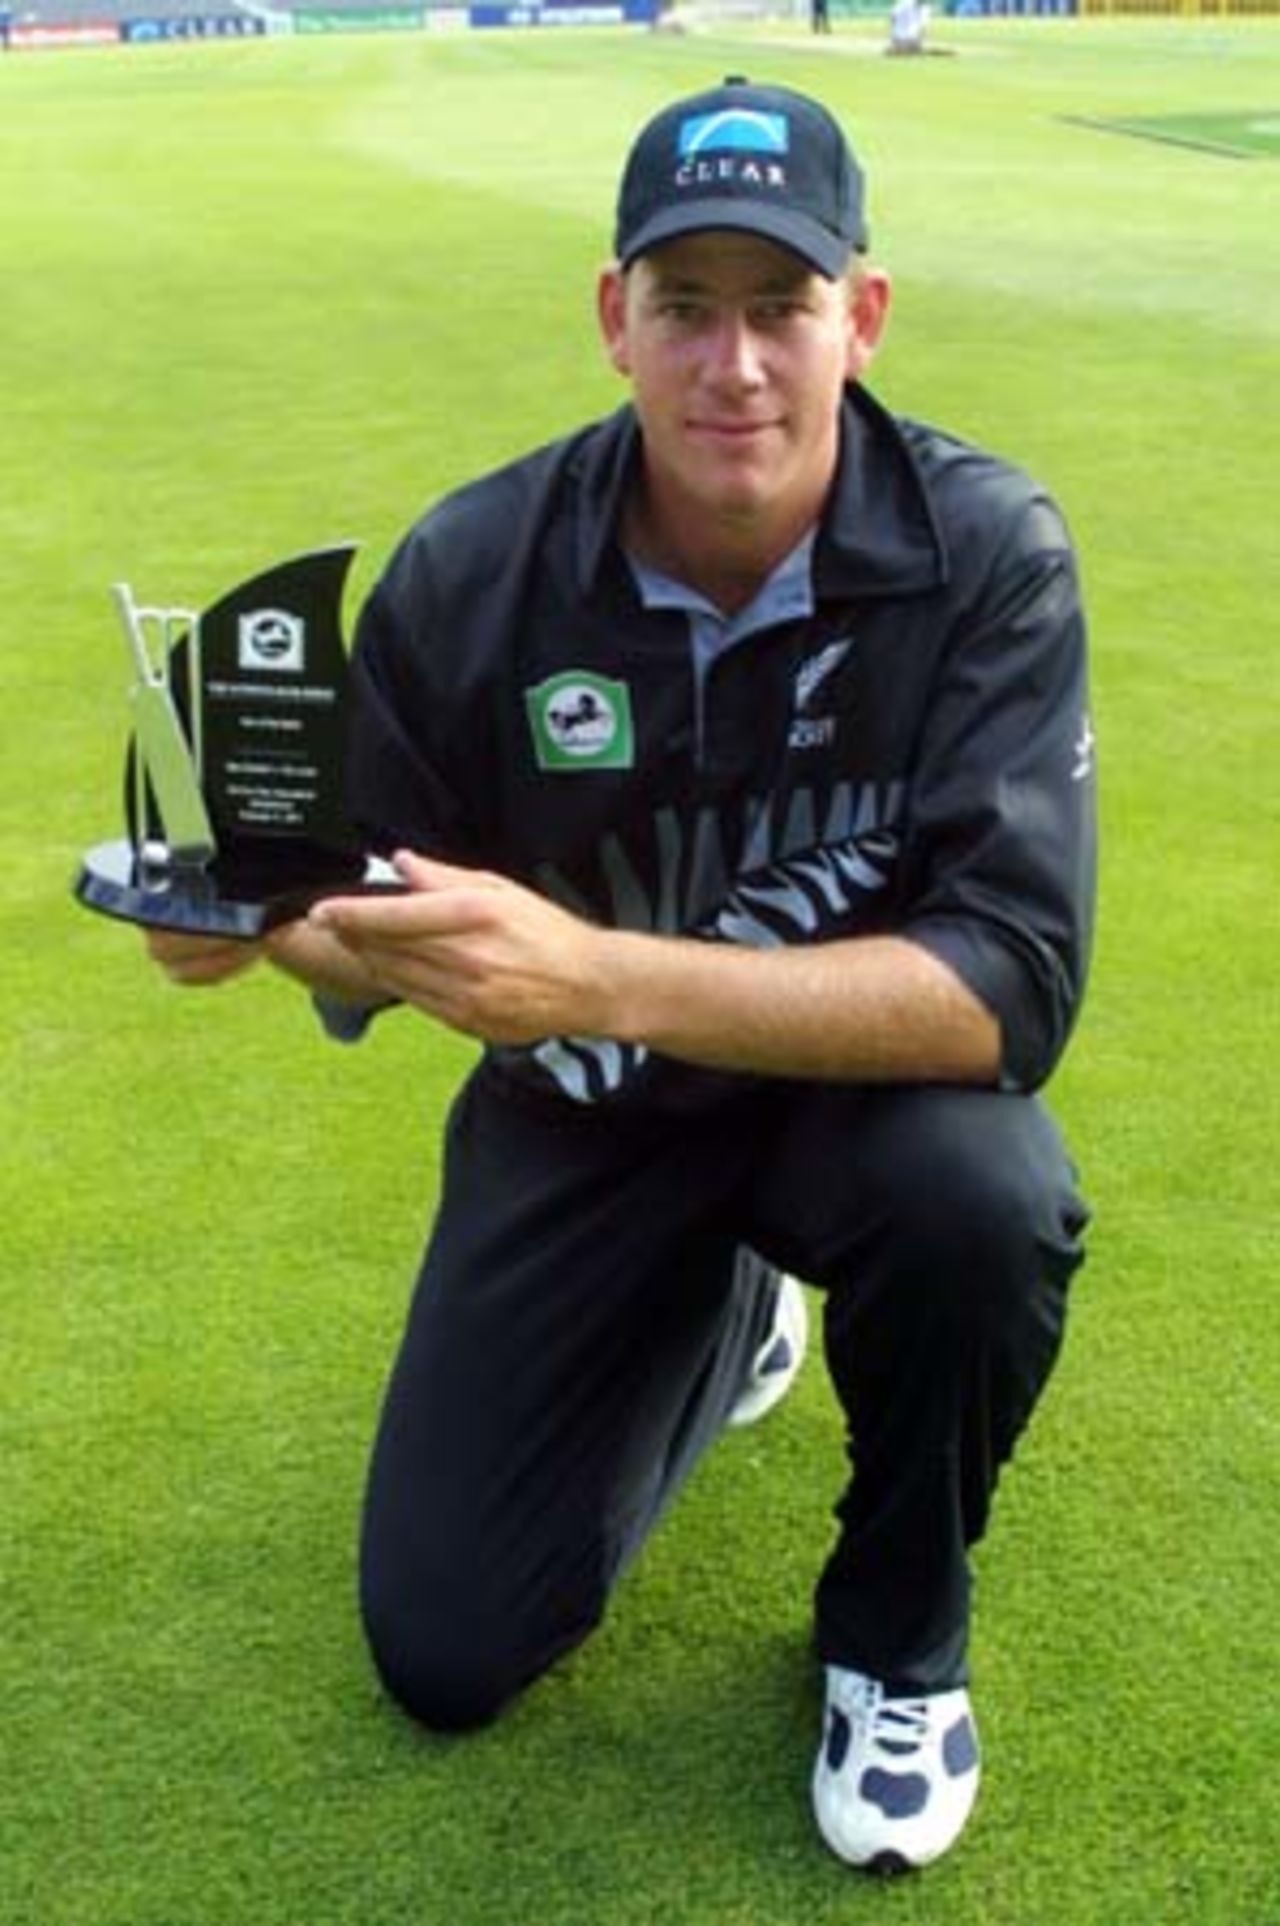 New Zealand batsman Jacob Oram holds the National Bank Player of the Match trophy. Oram scored 59 off 57 balls, including three fours and four sixes, and effected the run out of Sri Lankan top scorer Marvan Atapattu for 76, hitting the stumps direct from deep backward point. 5th One-Day International: New Zealand v Sri Lanka at Jade Stadium, Christchurch, 11 February 2001.